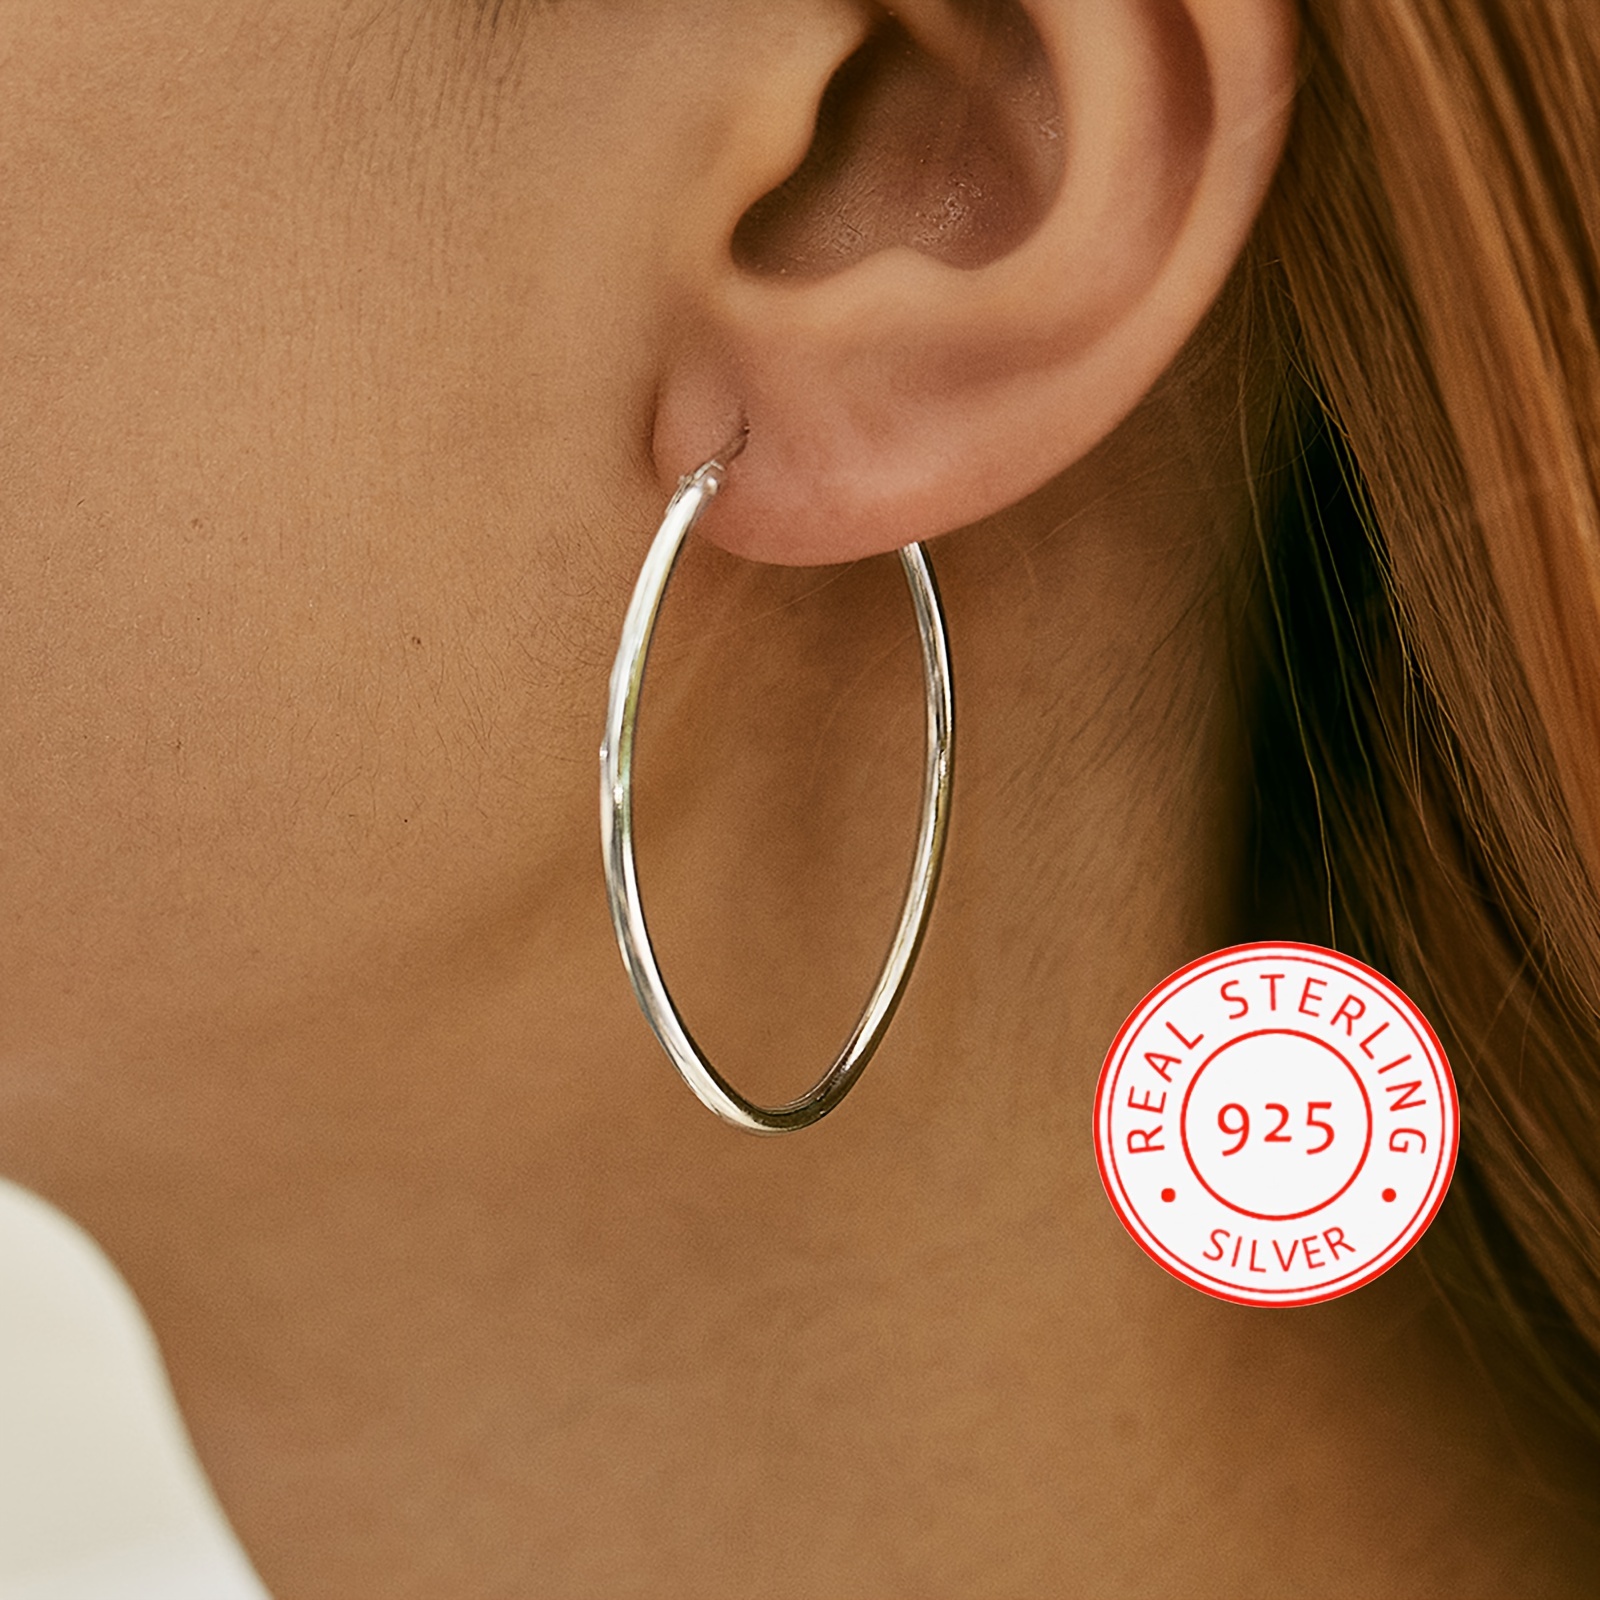 

Smooth Circle Design Hoop Earrings 925 Sterling Silver Hypoallergenic Jewelry For Women Daily Casual